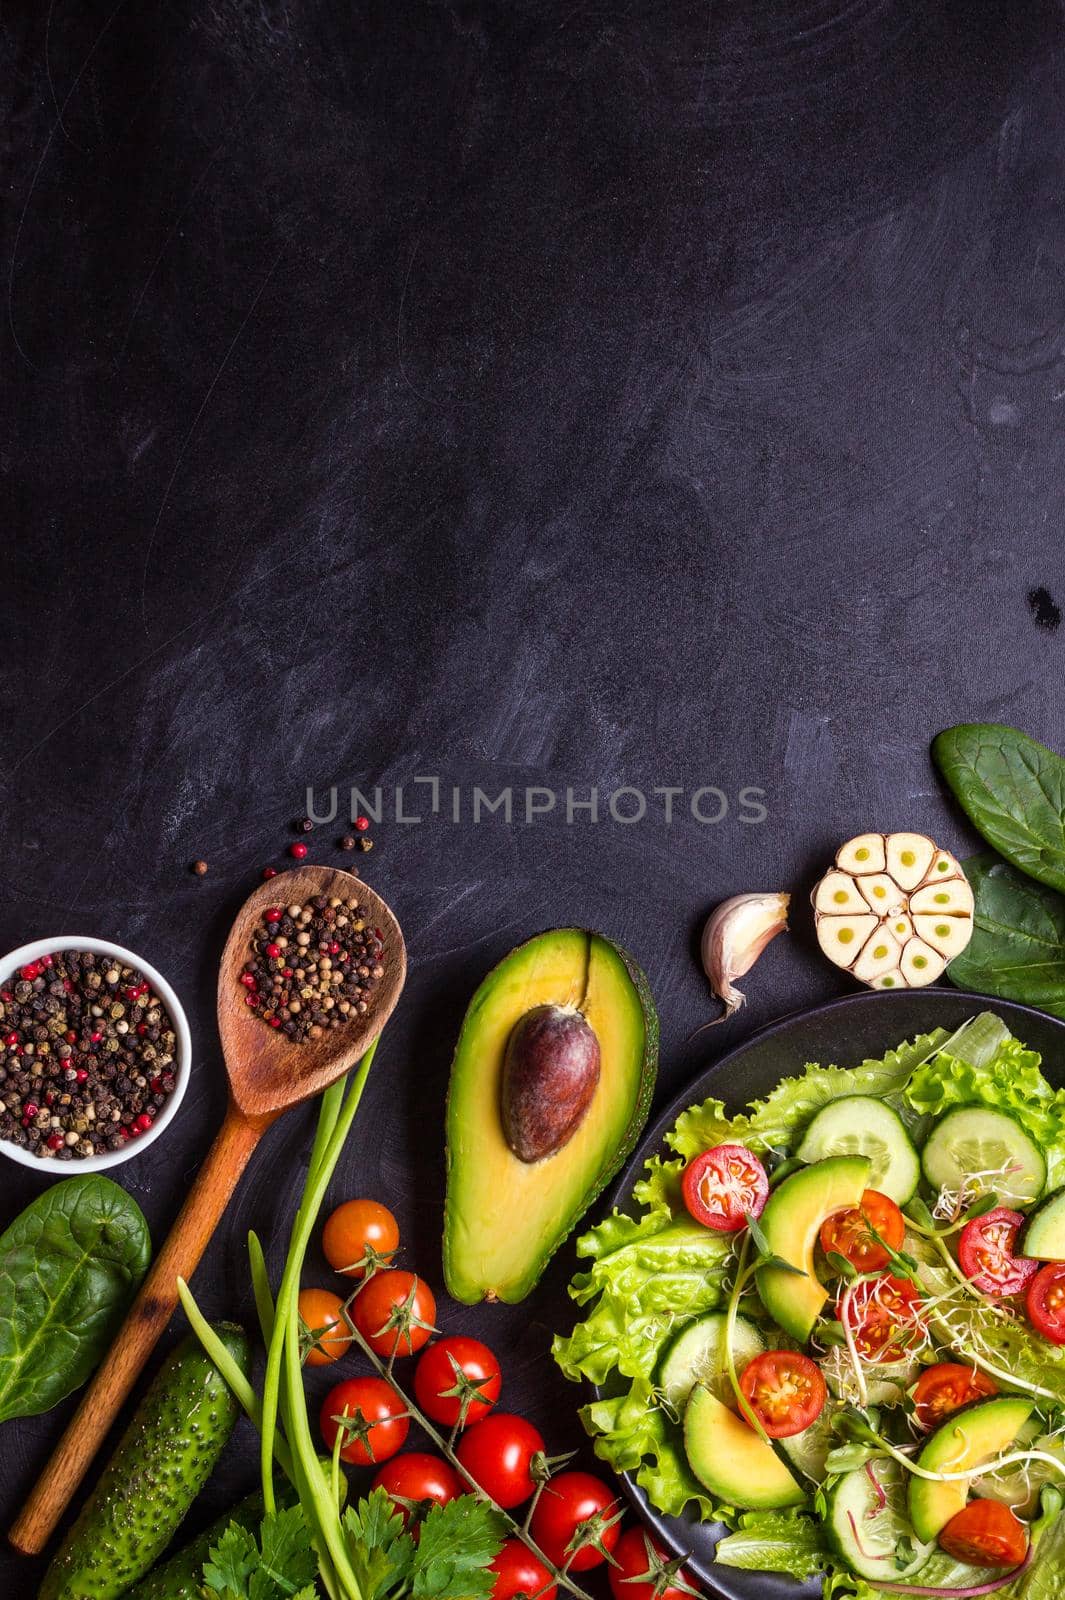 Ingredients for making salad on rustic black chalk board background. Vegetable salad in bowl, avocado, tomato, cucumber, spinach. Healthy, clean eating concept. Vegan or gluten free diet. Copy space